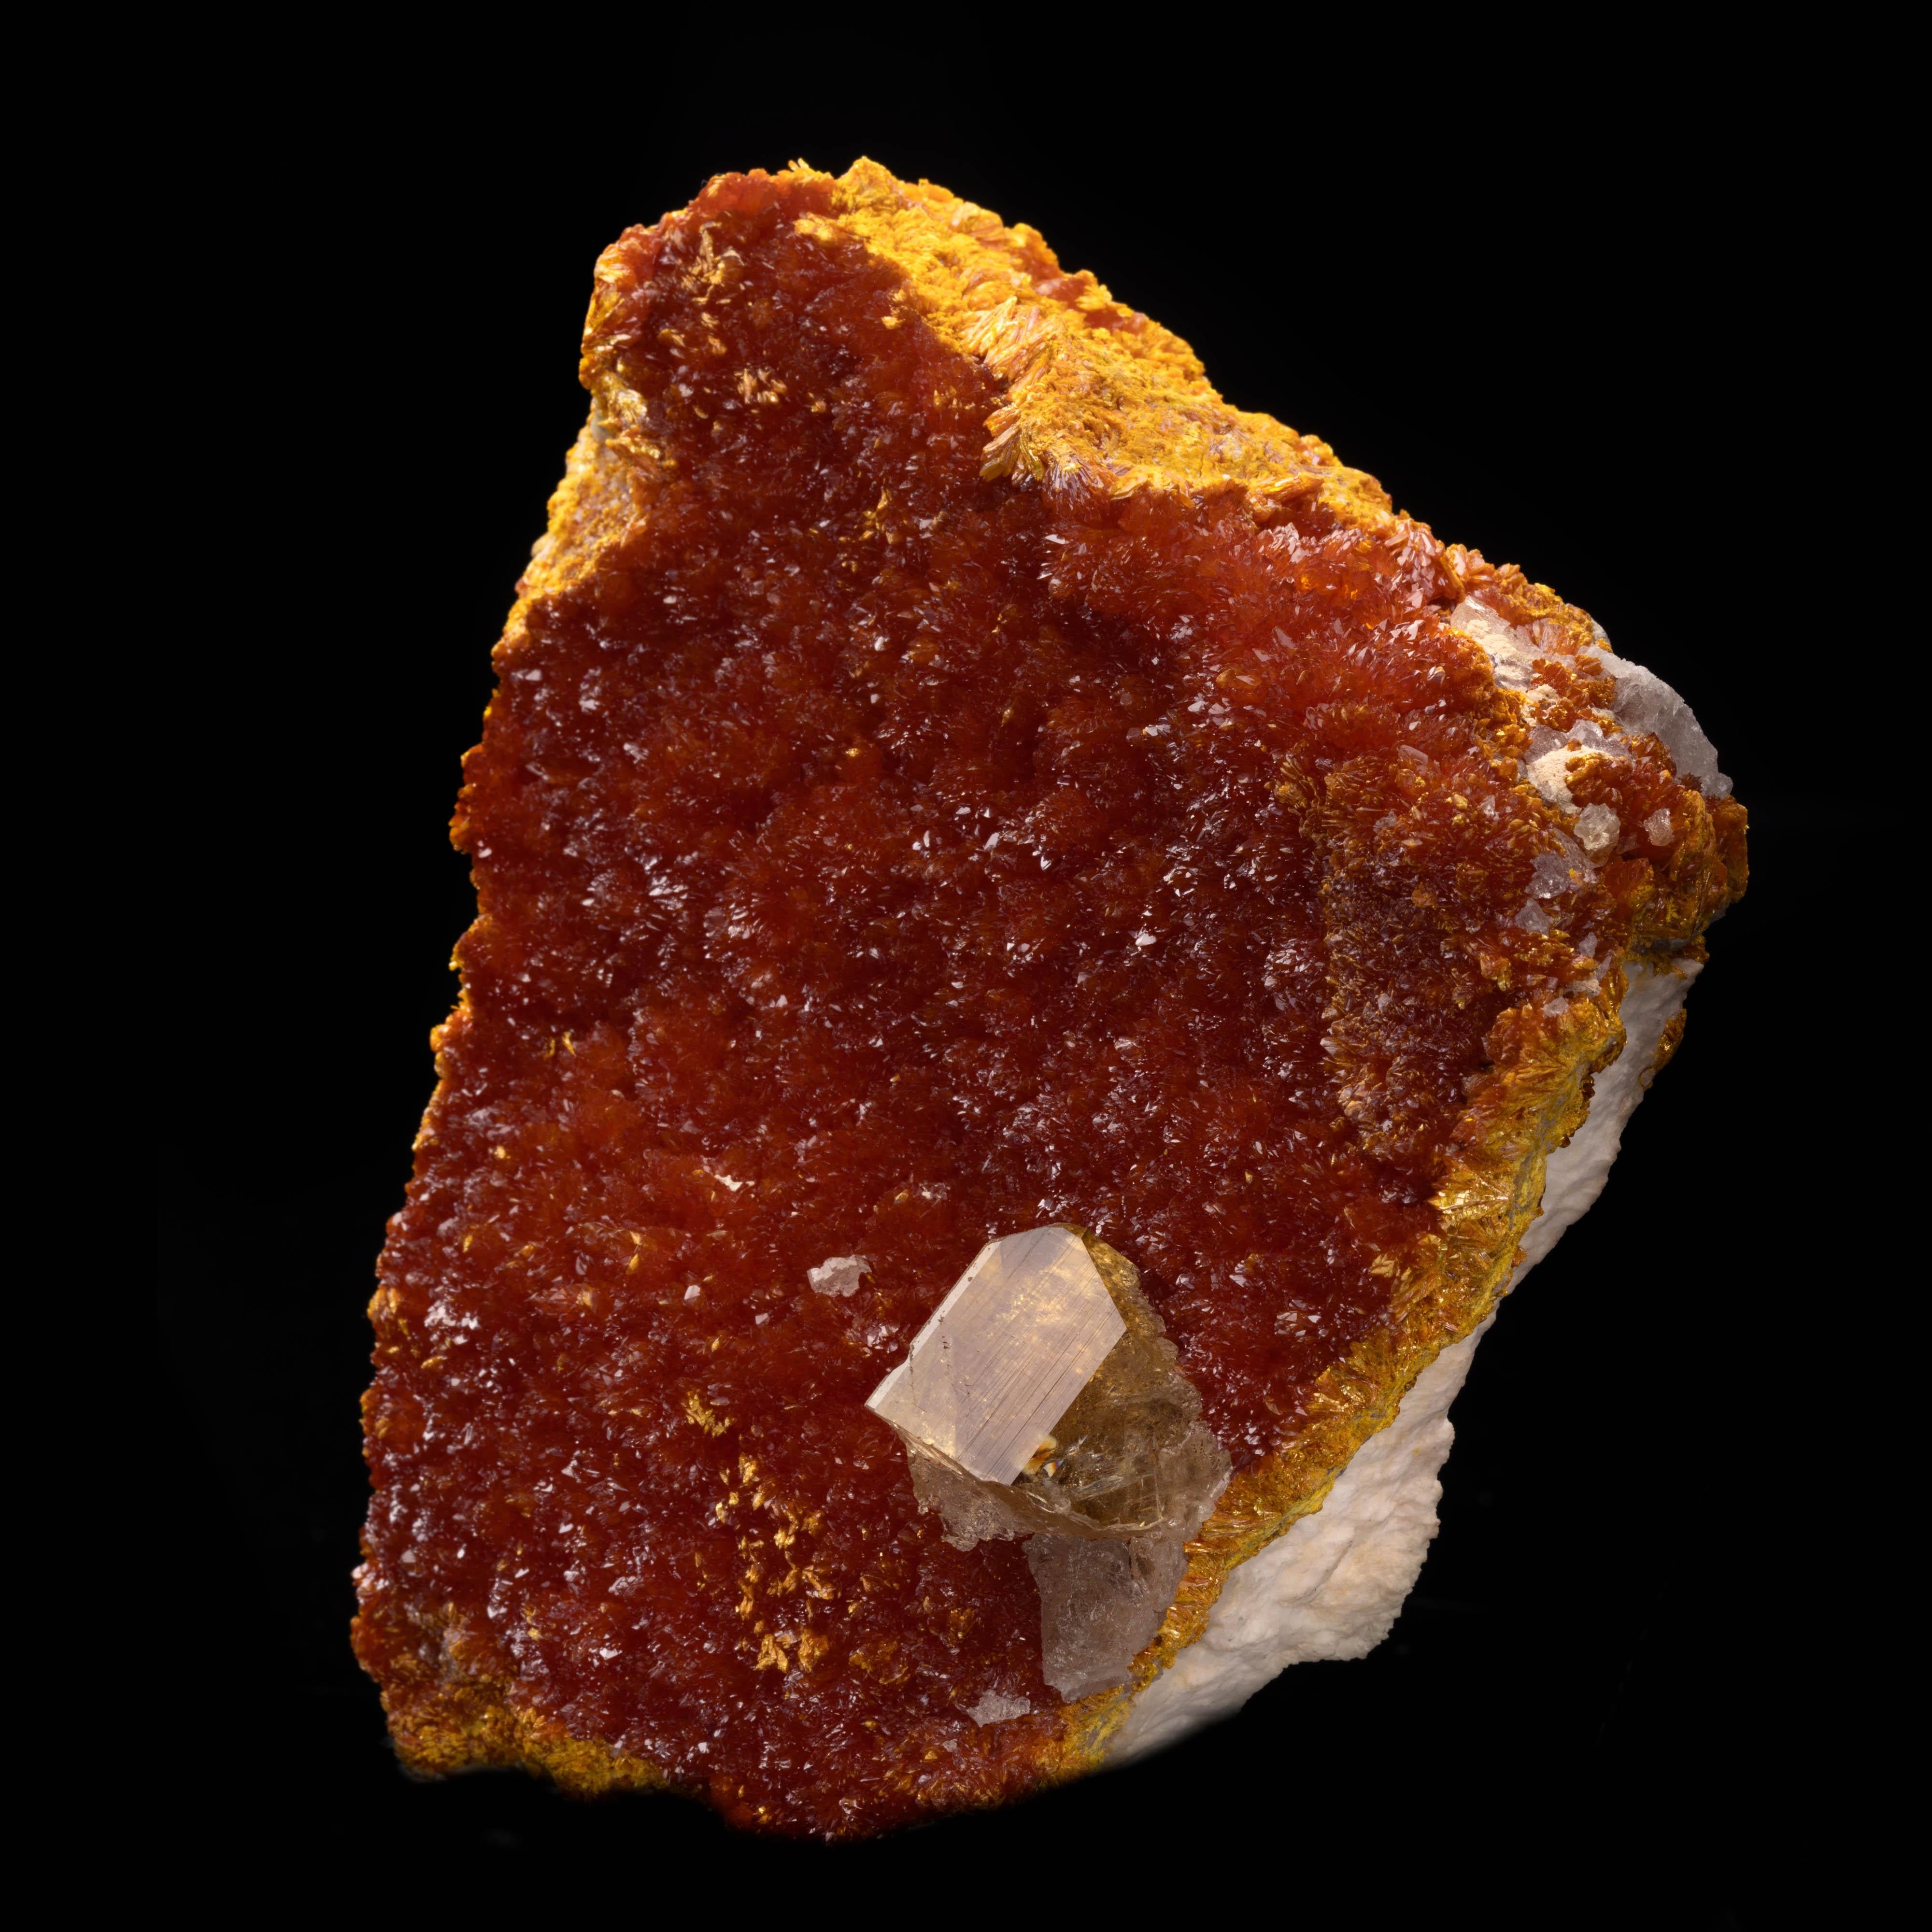 El'brusskiy mine, Elbrus Mt, Kabardino-Balkarian Republic, Northern Caucasus Region, Russia

This large, stunningly rich orange orpiment specimen with contrasting yellow around the edges comes on a 4